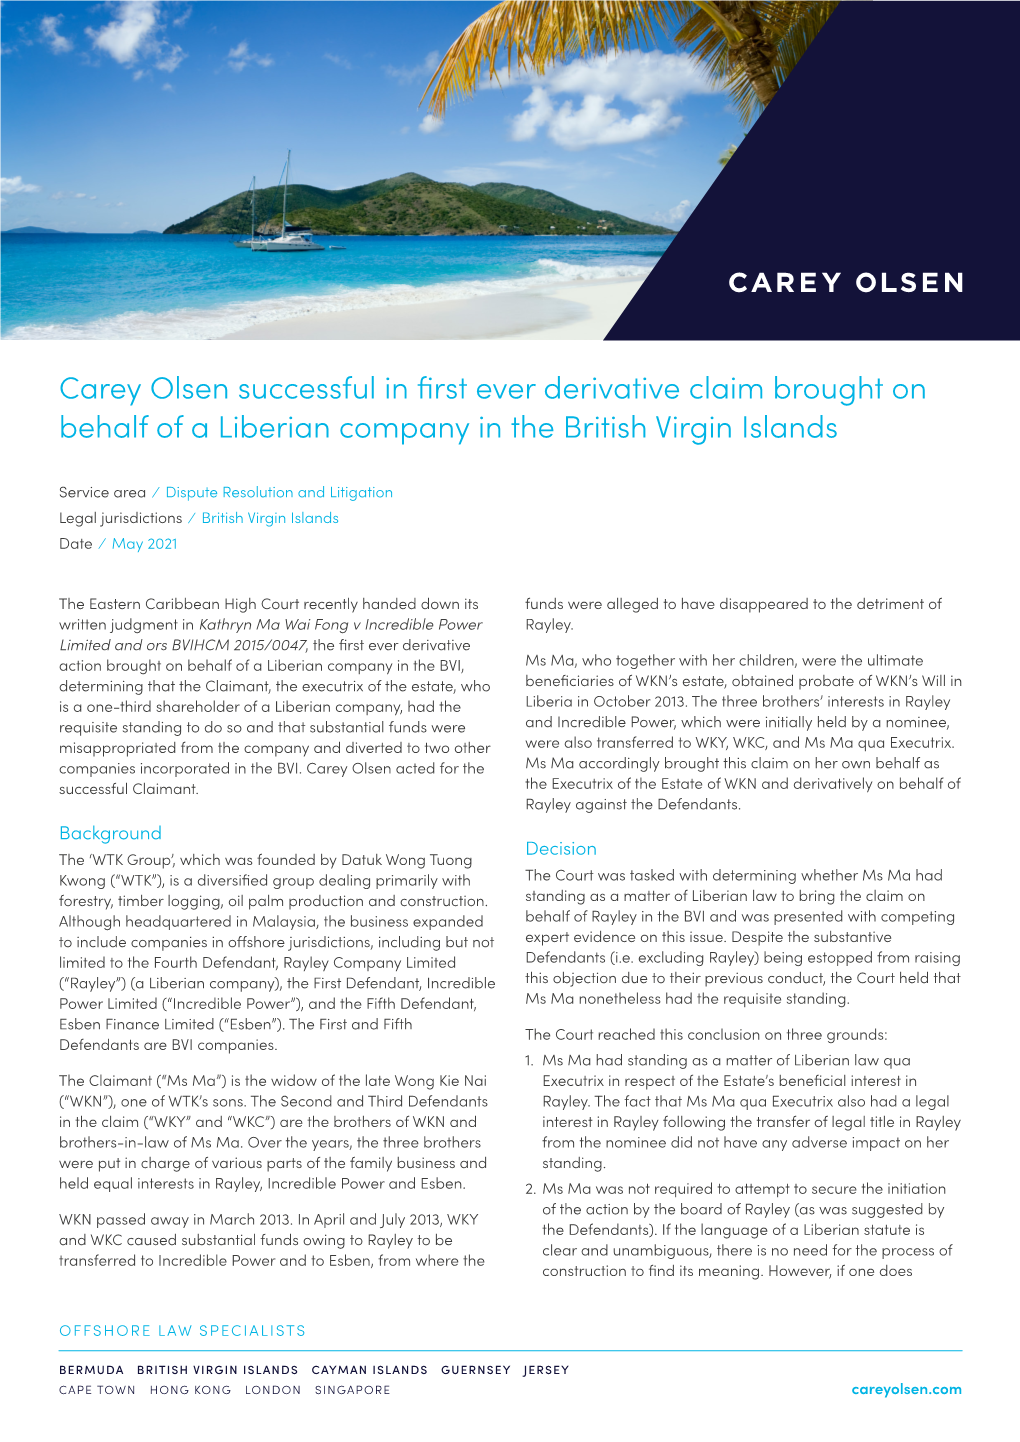 Carey Olsen Successful in First Ever Derivative Claim Brought on Behalf of a Liberian Company in the British Virgin Islands